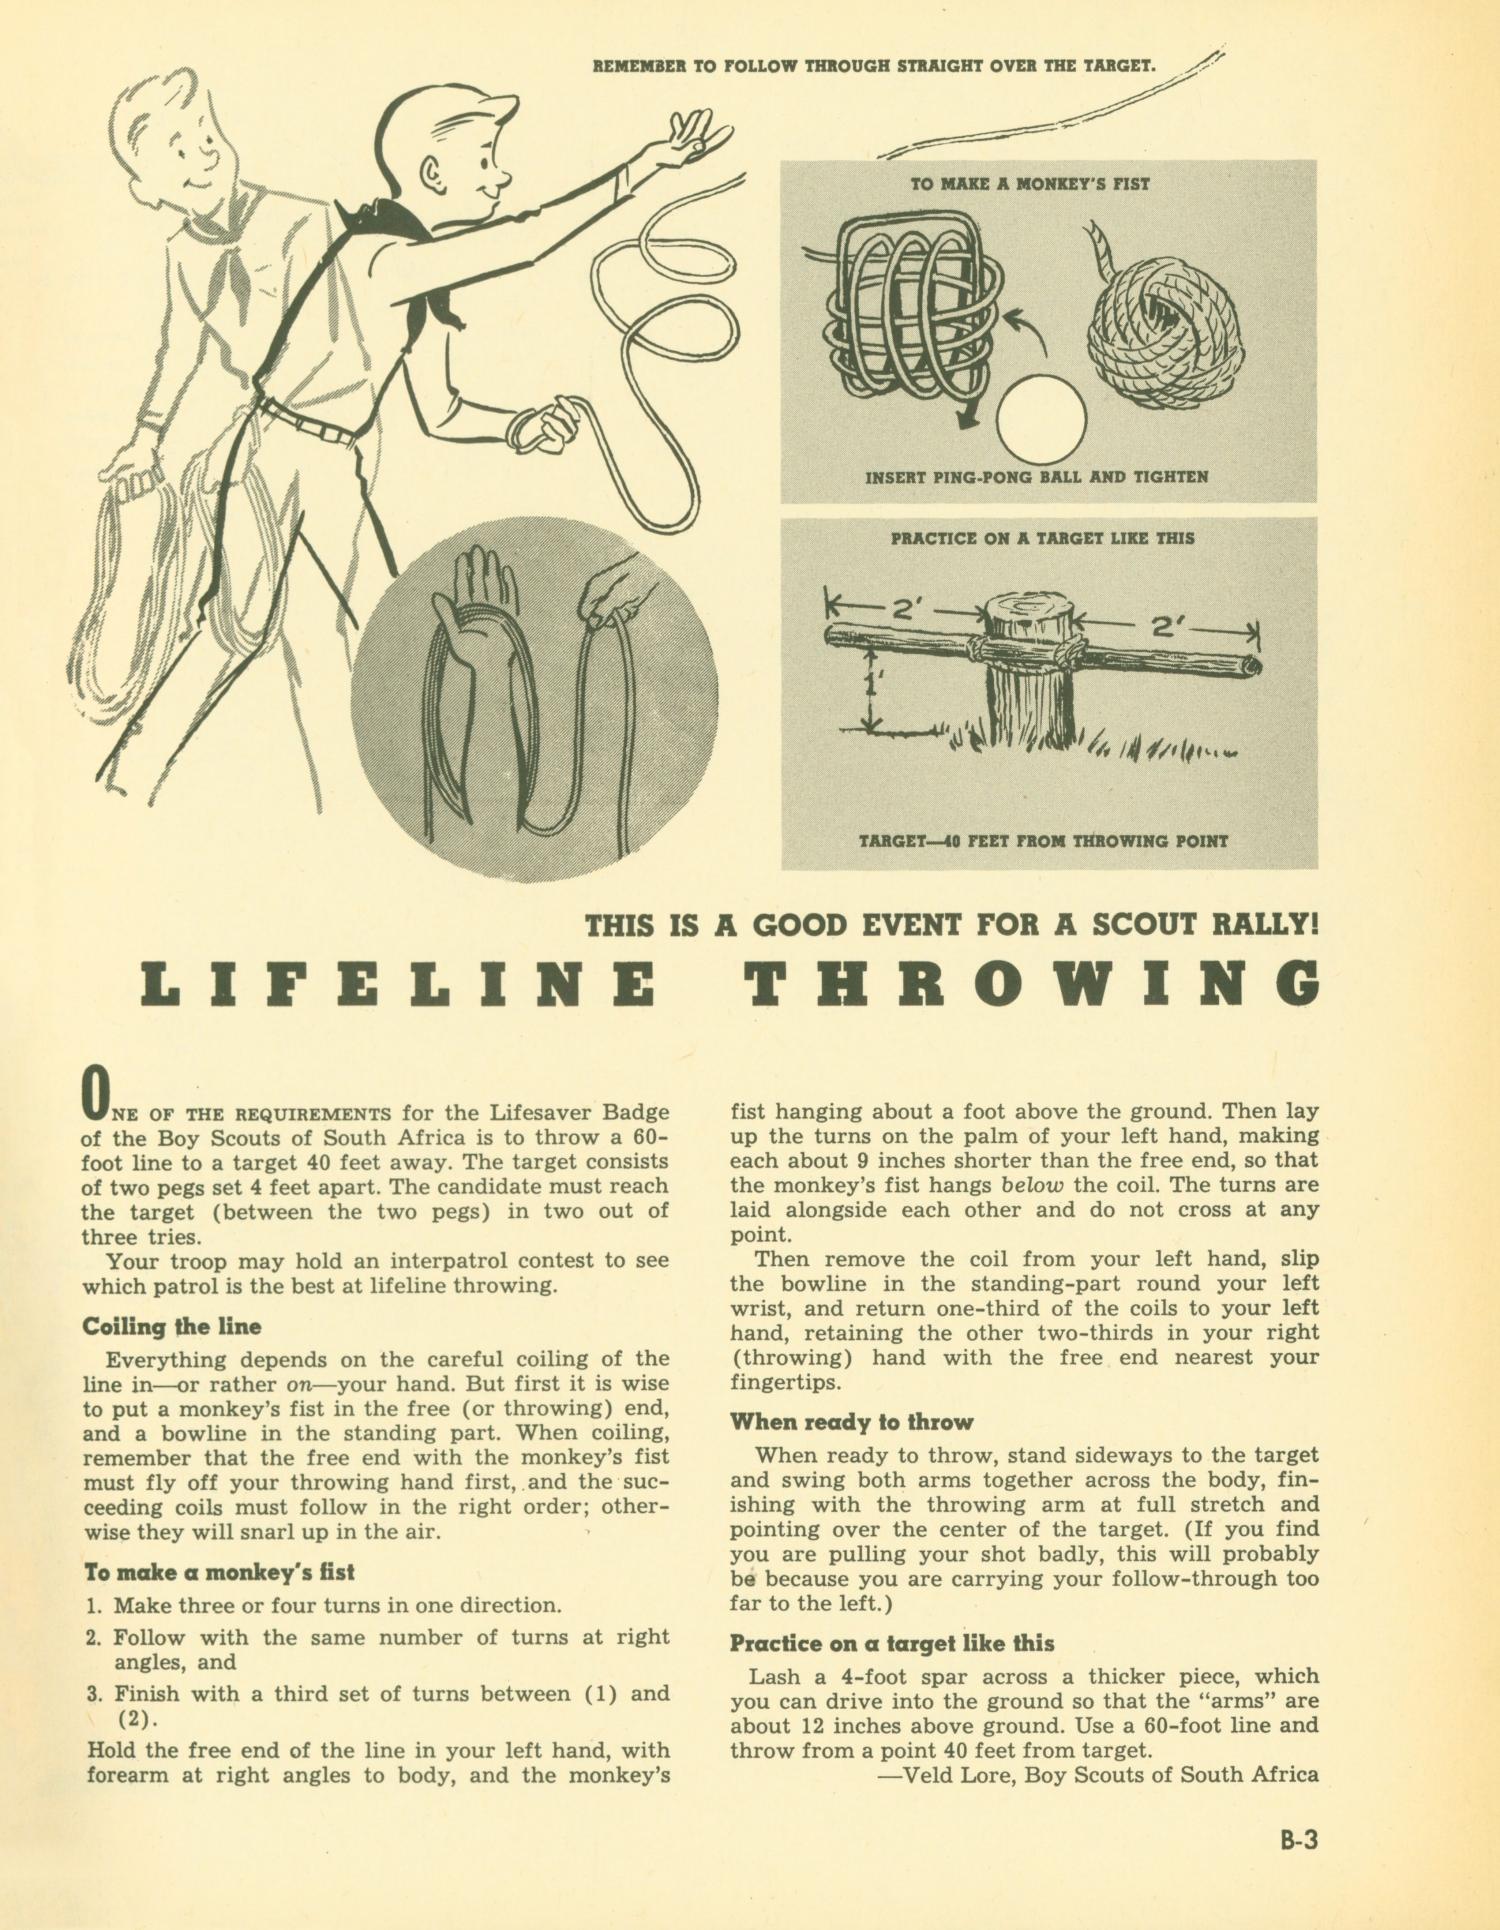 Scouting, Volume 55, Number 2, February 1967
                                                
                                                    B3
                                                